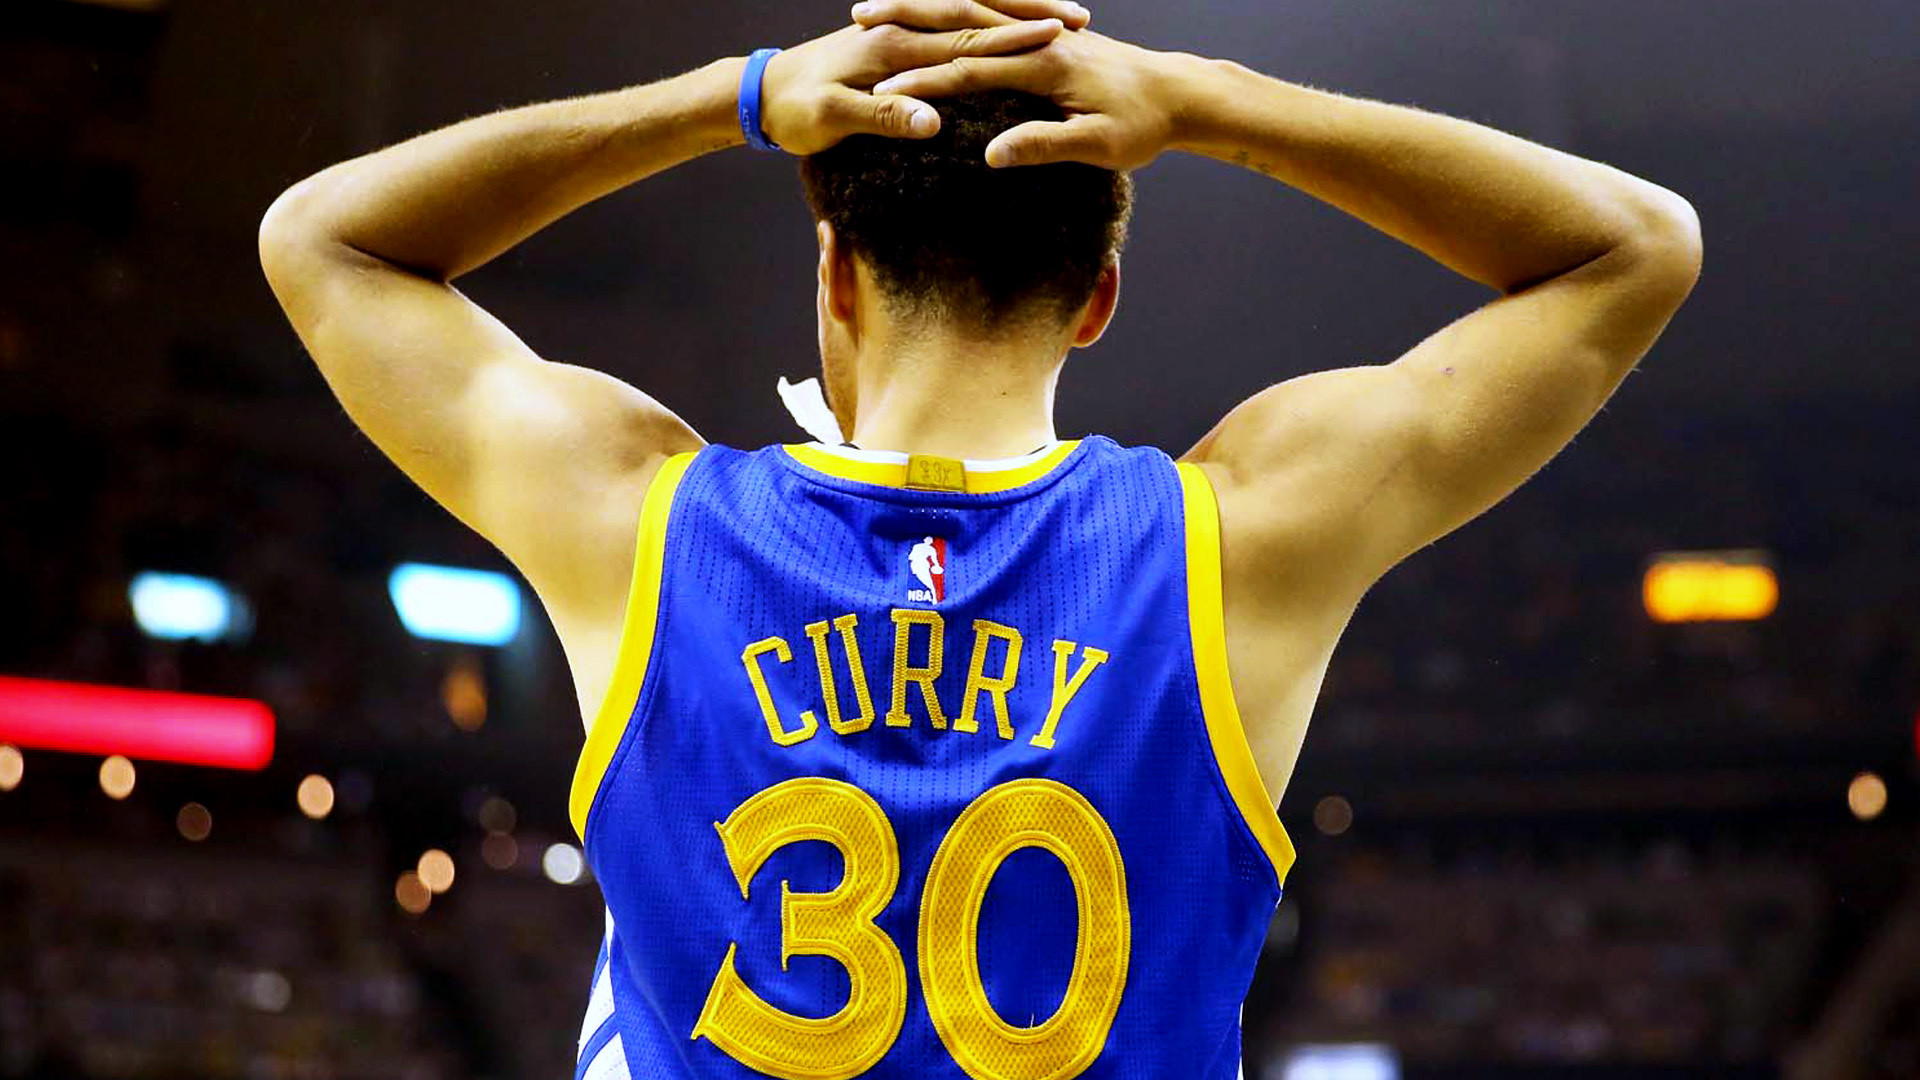 Stephen Curry Wallpaper HD 2017 (82+ images)1920 x 1080